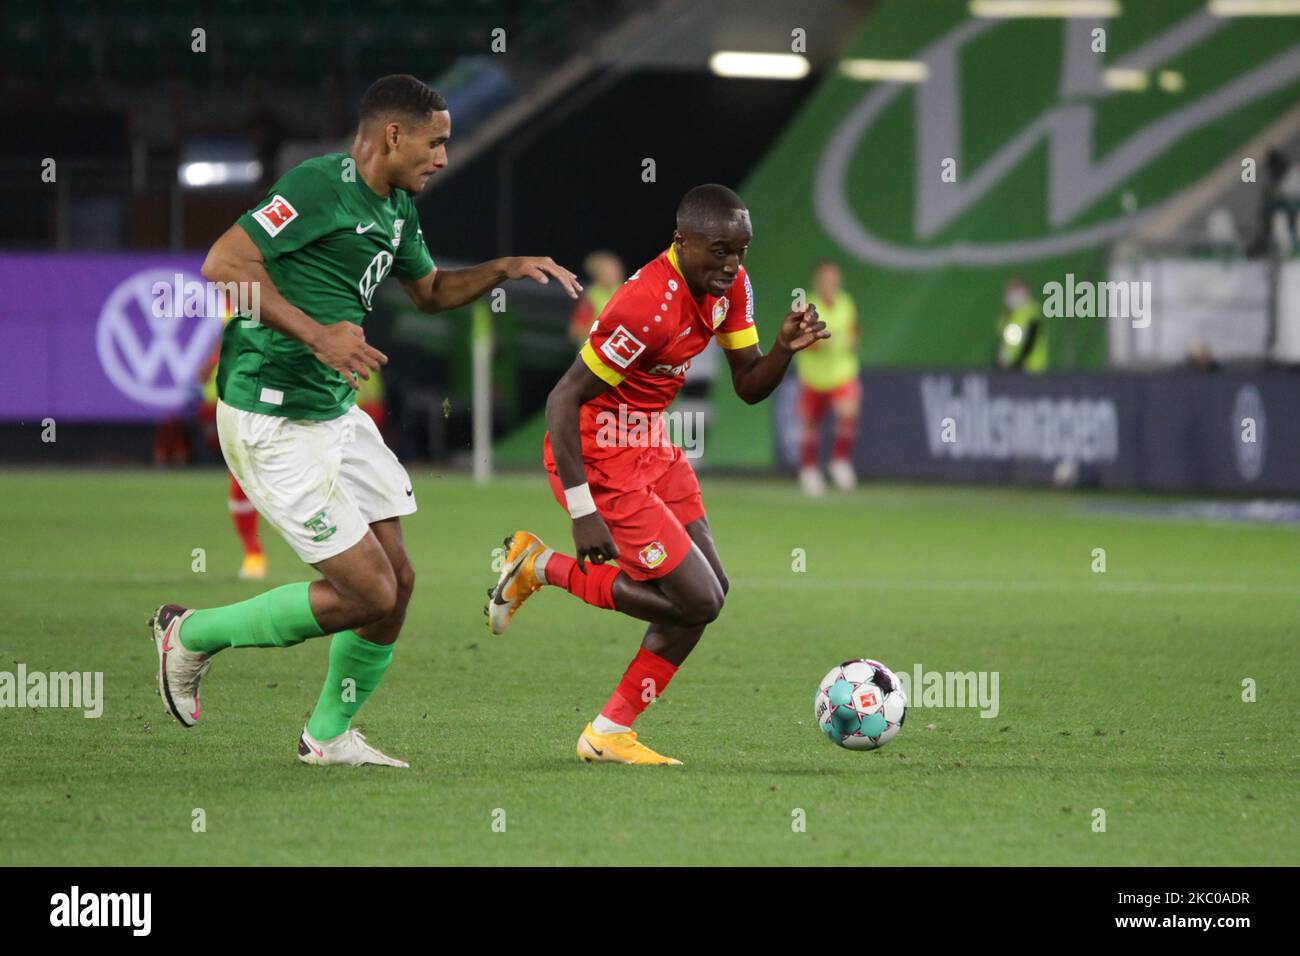 Maxence Lacroix of VfL Wolfsburg and Moussa Diaby of Bayer 04 Leverkusen runs for the ball during the Bundesliga match between VfL Wolfsburg and Bayer 04 Leverkusen at Volkswagen Arena on September 20, 2020 in Wolfsburg, Germany. (Photo by Peter Niedung/NurPhoto) Stock Photo